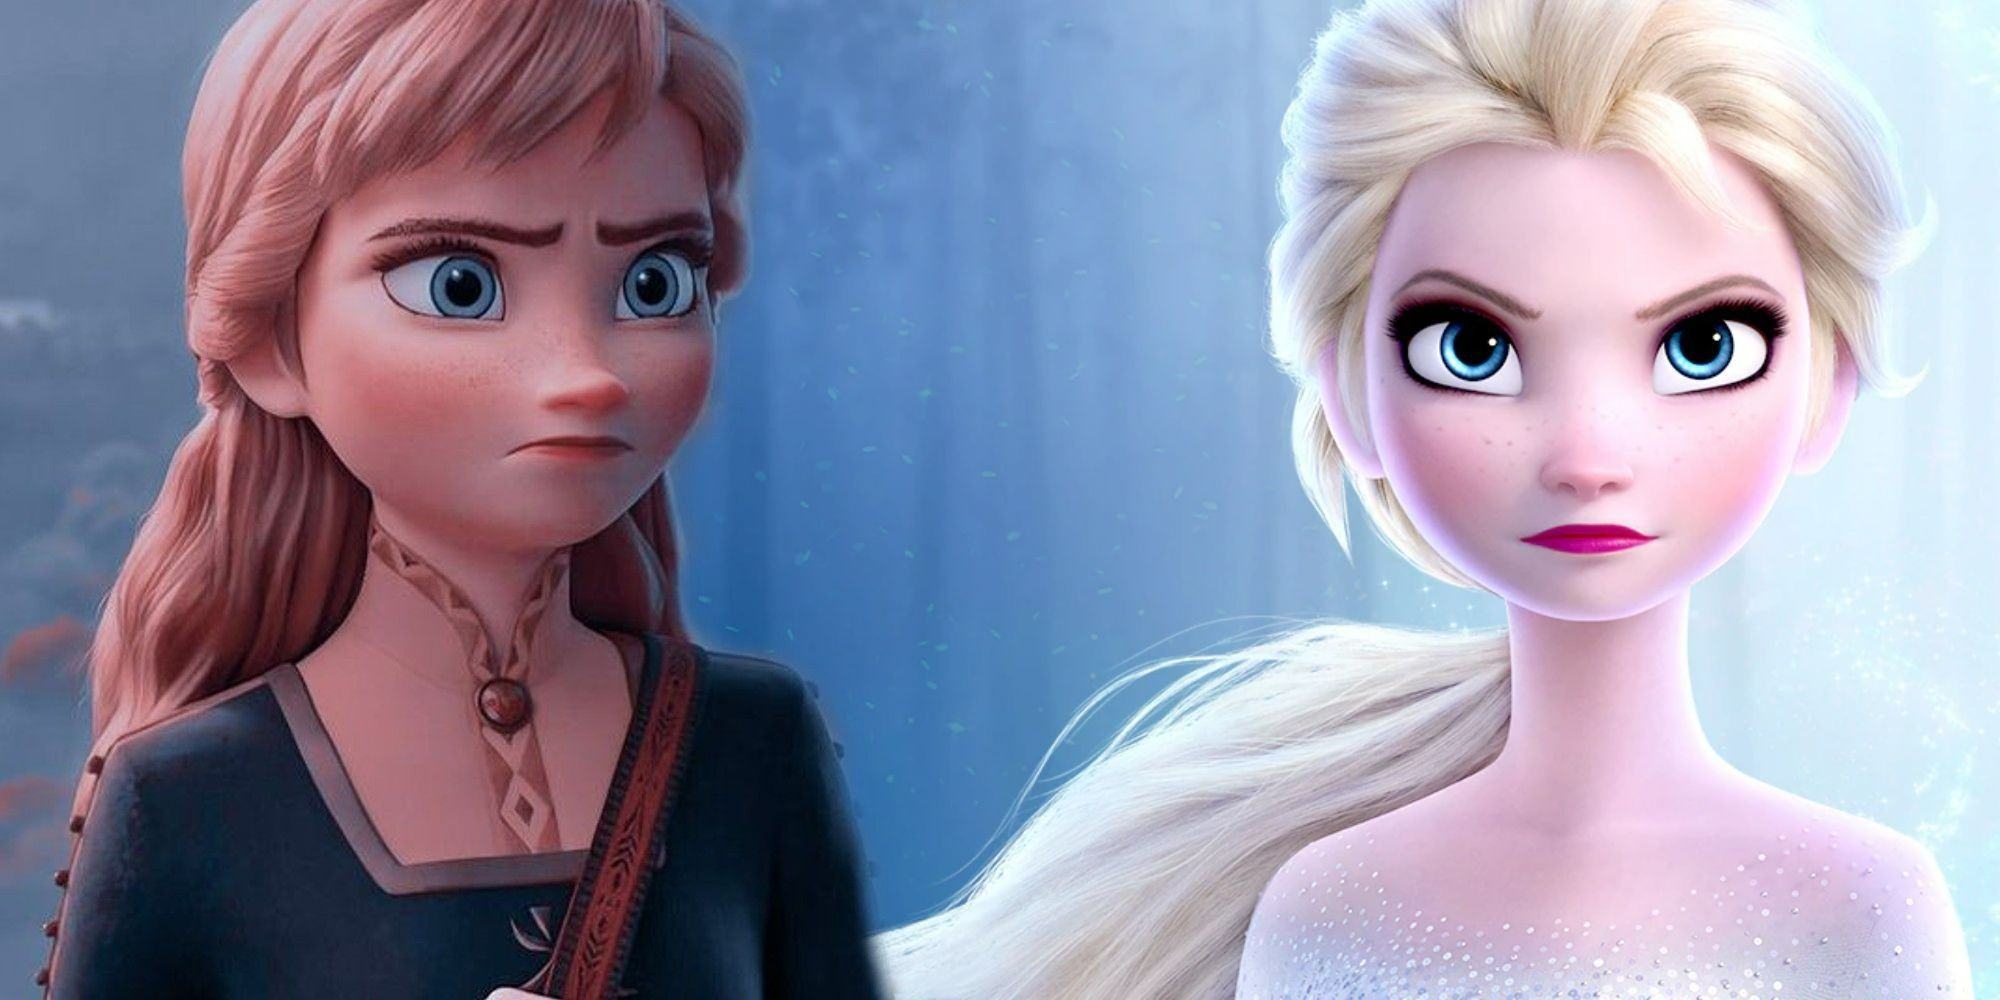 Composite image of Anna and Elsa from Frozen